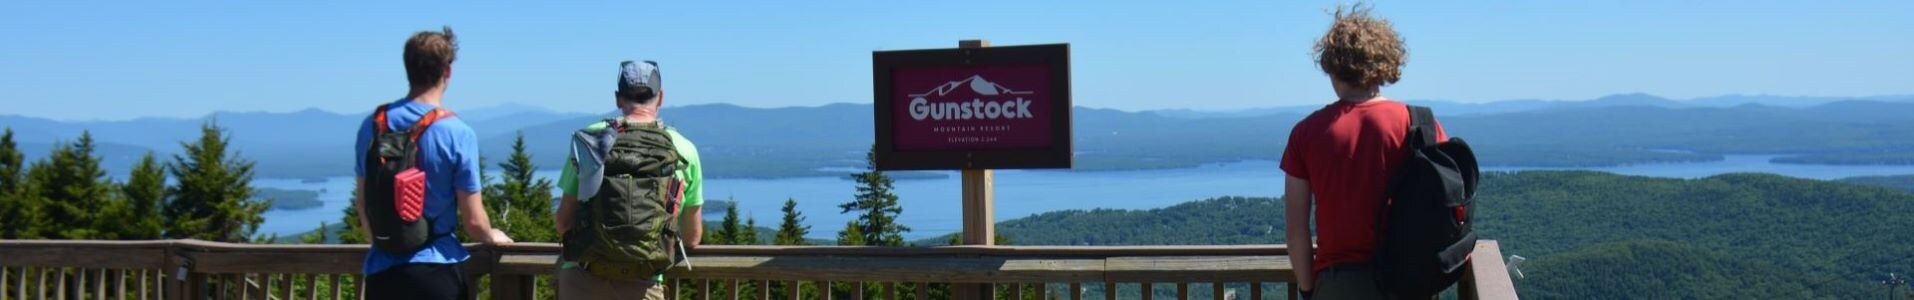 Enjoying the view from the Gunstock summit deck